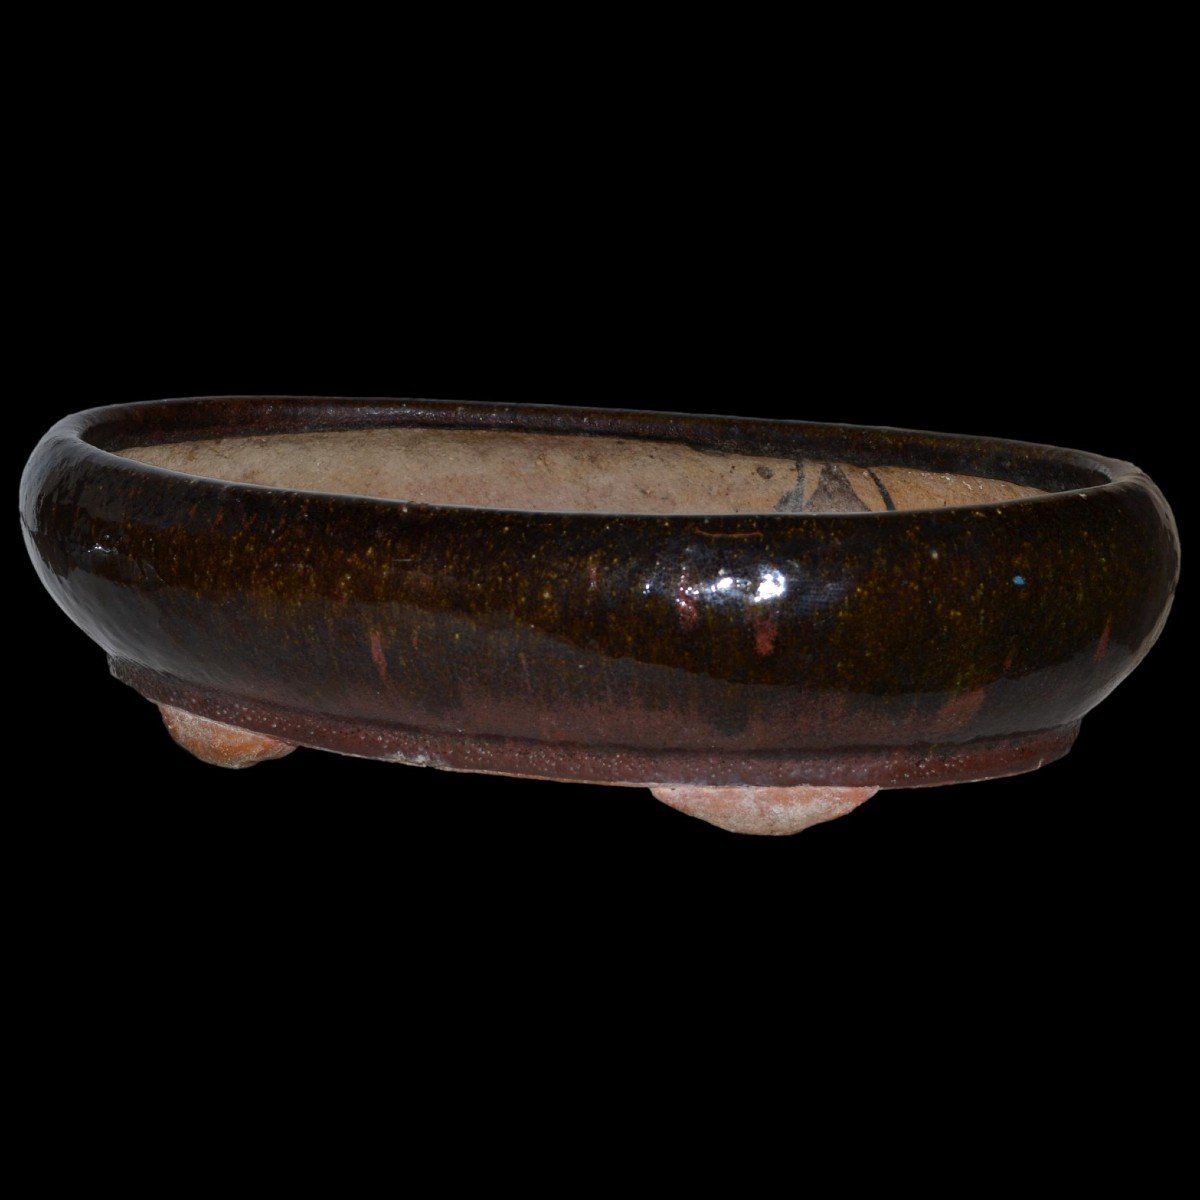 Important Old Bonsai Pot, Brown Veined Ocher Glaze, 19th Century Japan In Very Good Condition -photo-8